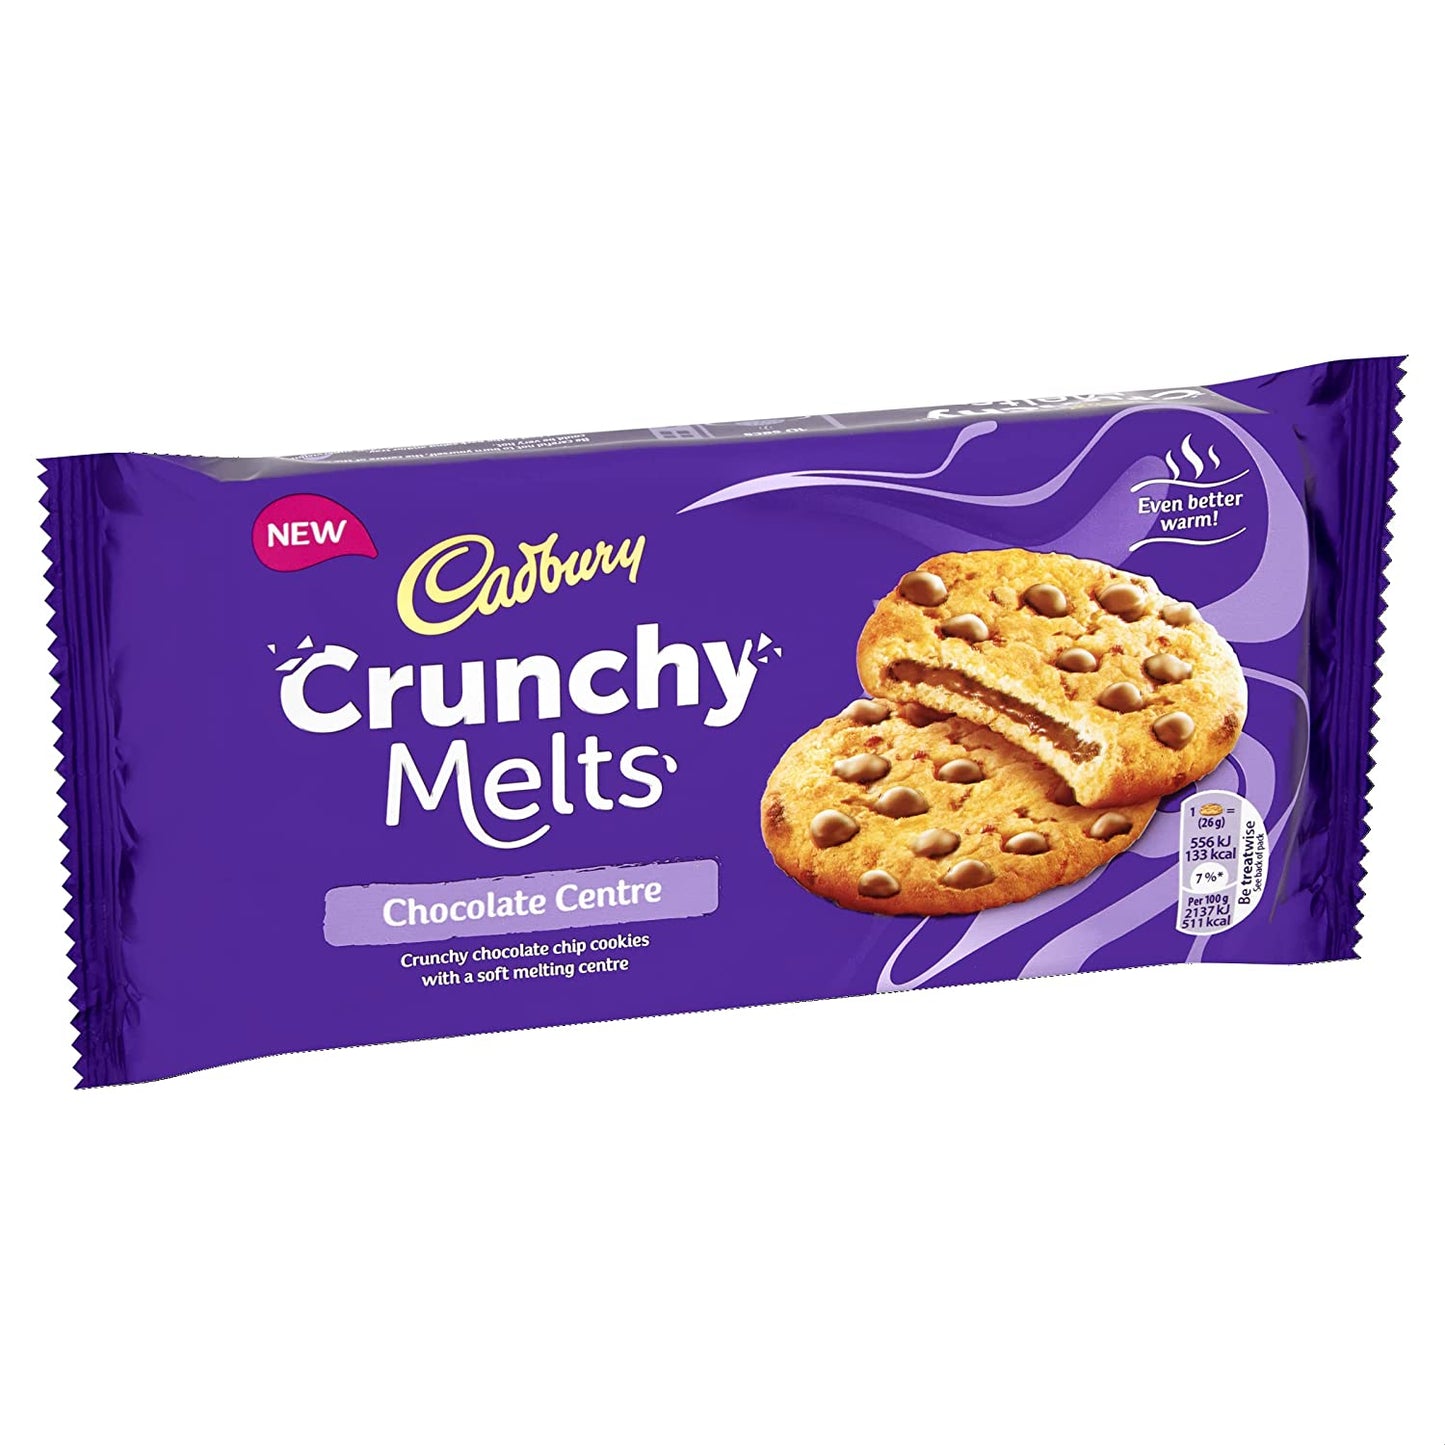 Cad Crunchy Melts Chocolate Centre Chocolate Chip Cookies 156g